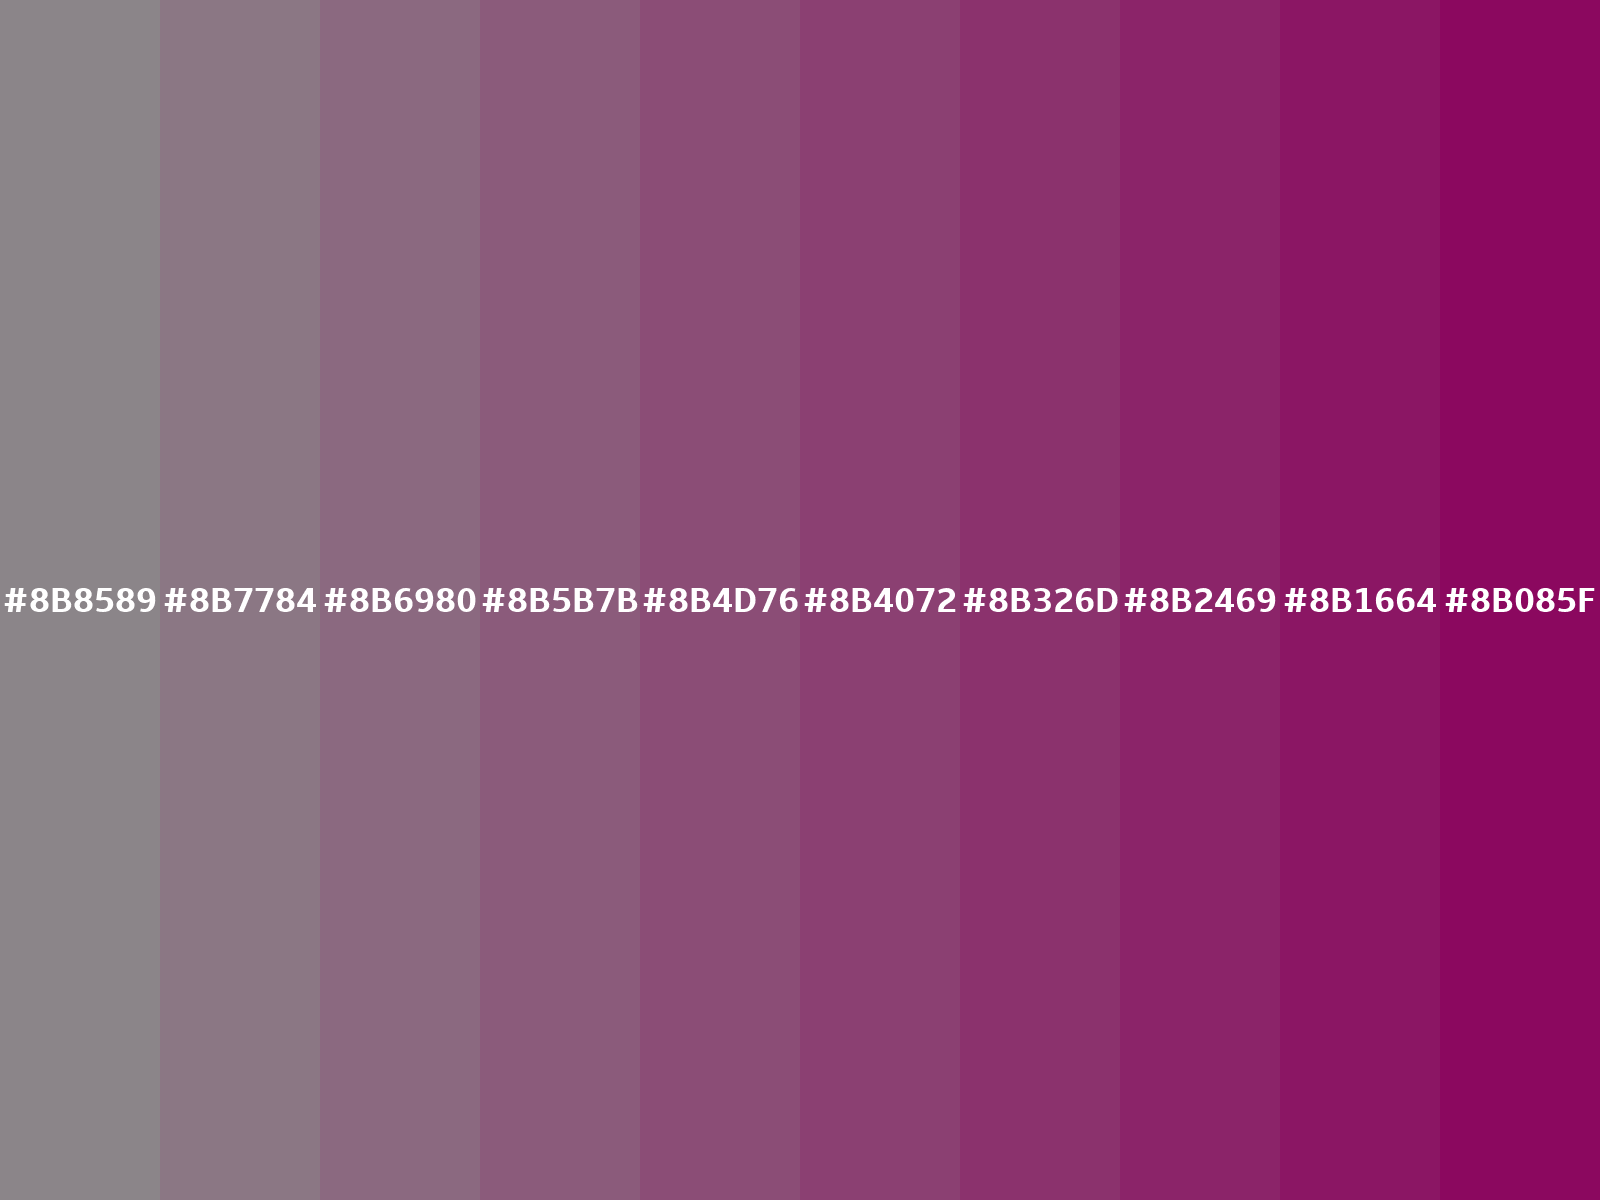 colorswall on X: Tints of Taupe Grey color #8B8589 hex #8b8589, #979195,  #a29da1, #aeaaac, #b9b6b8, #c5c2c4, #d1ced0, #dcdadc, #e8e7e7, #f3f3f3  #colors #palette   / X